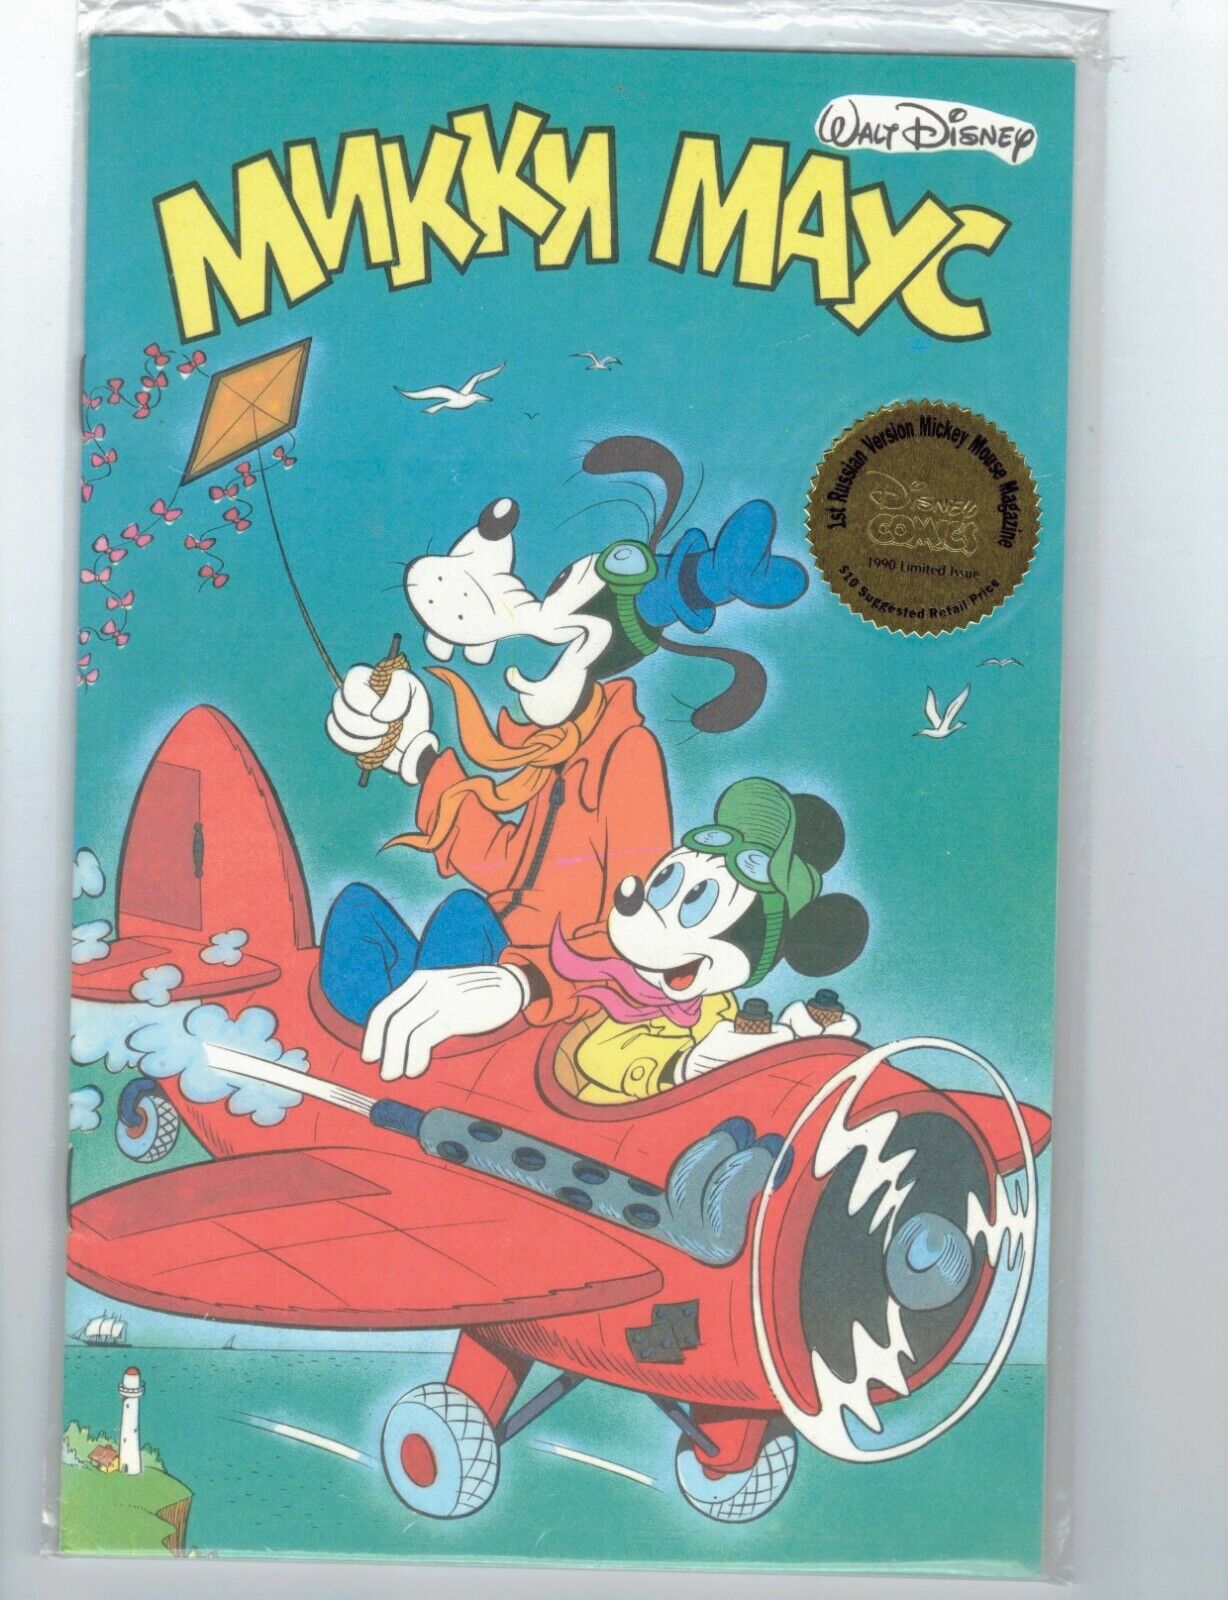 Walt Disney\'s Mnkkn Mayc #1 VF/NM 1st Russian version Mickey Mouse 1990 limited